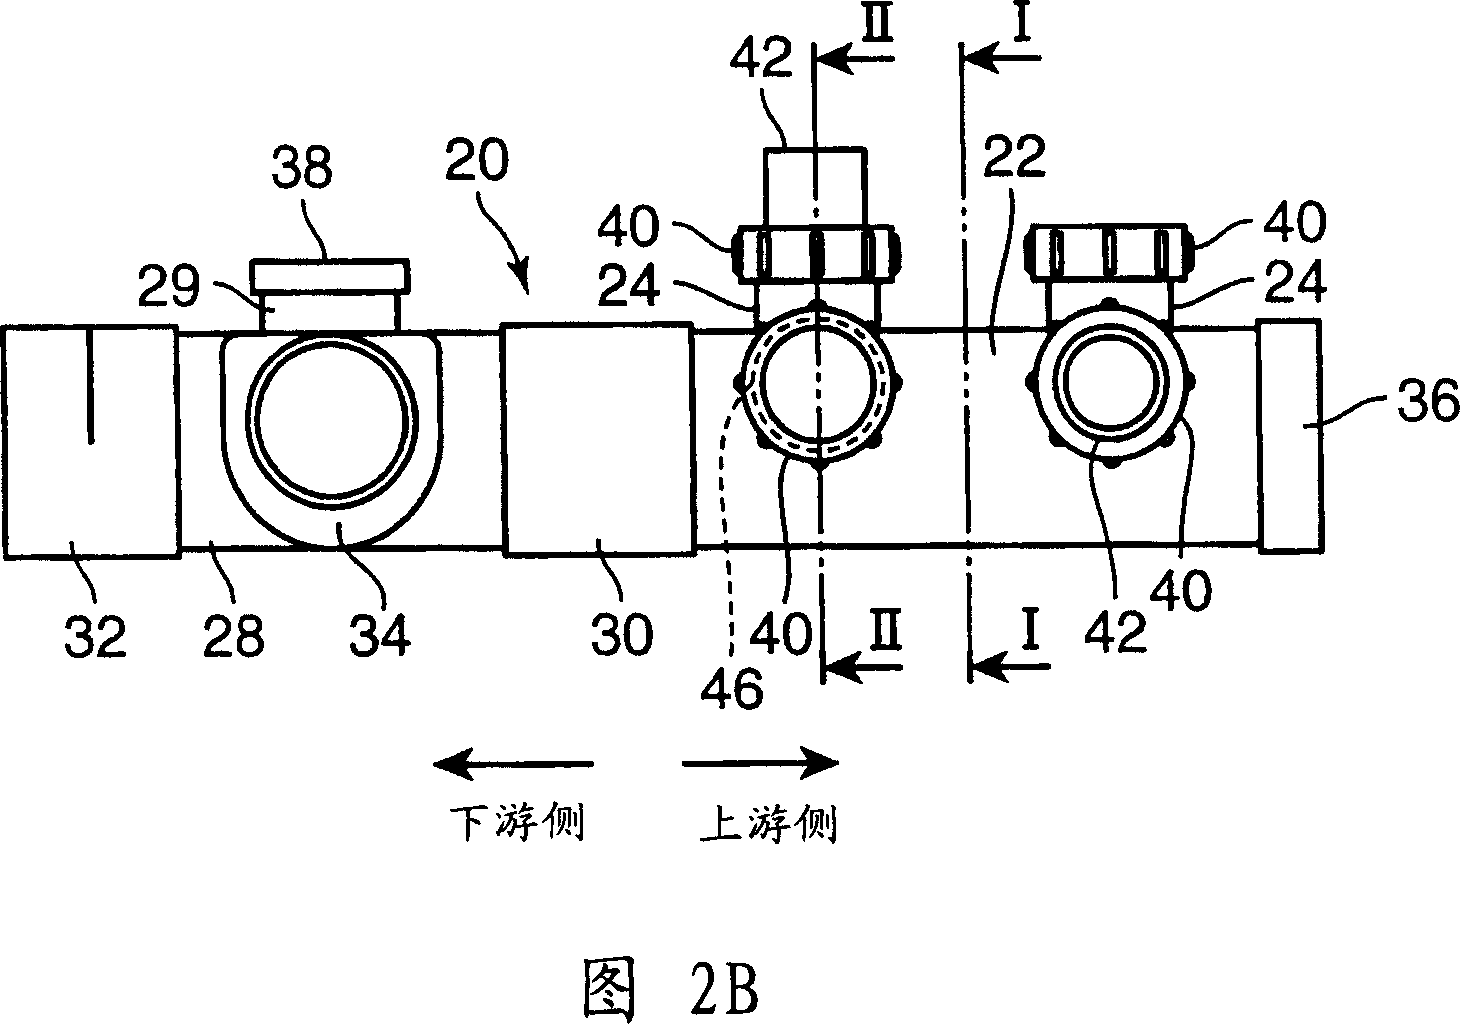 Drain connection and drain pipe using same